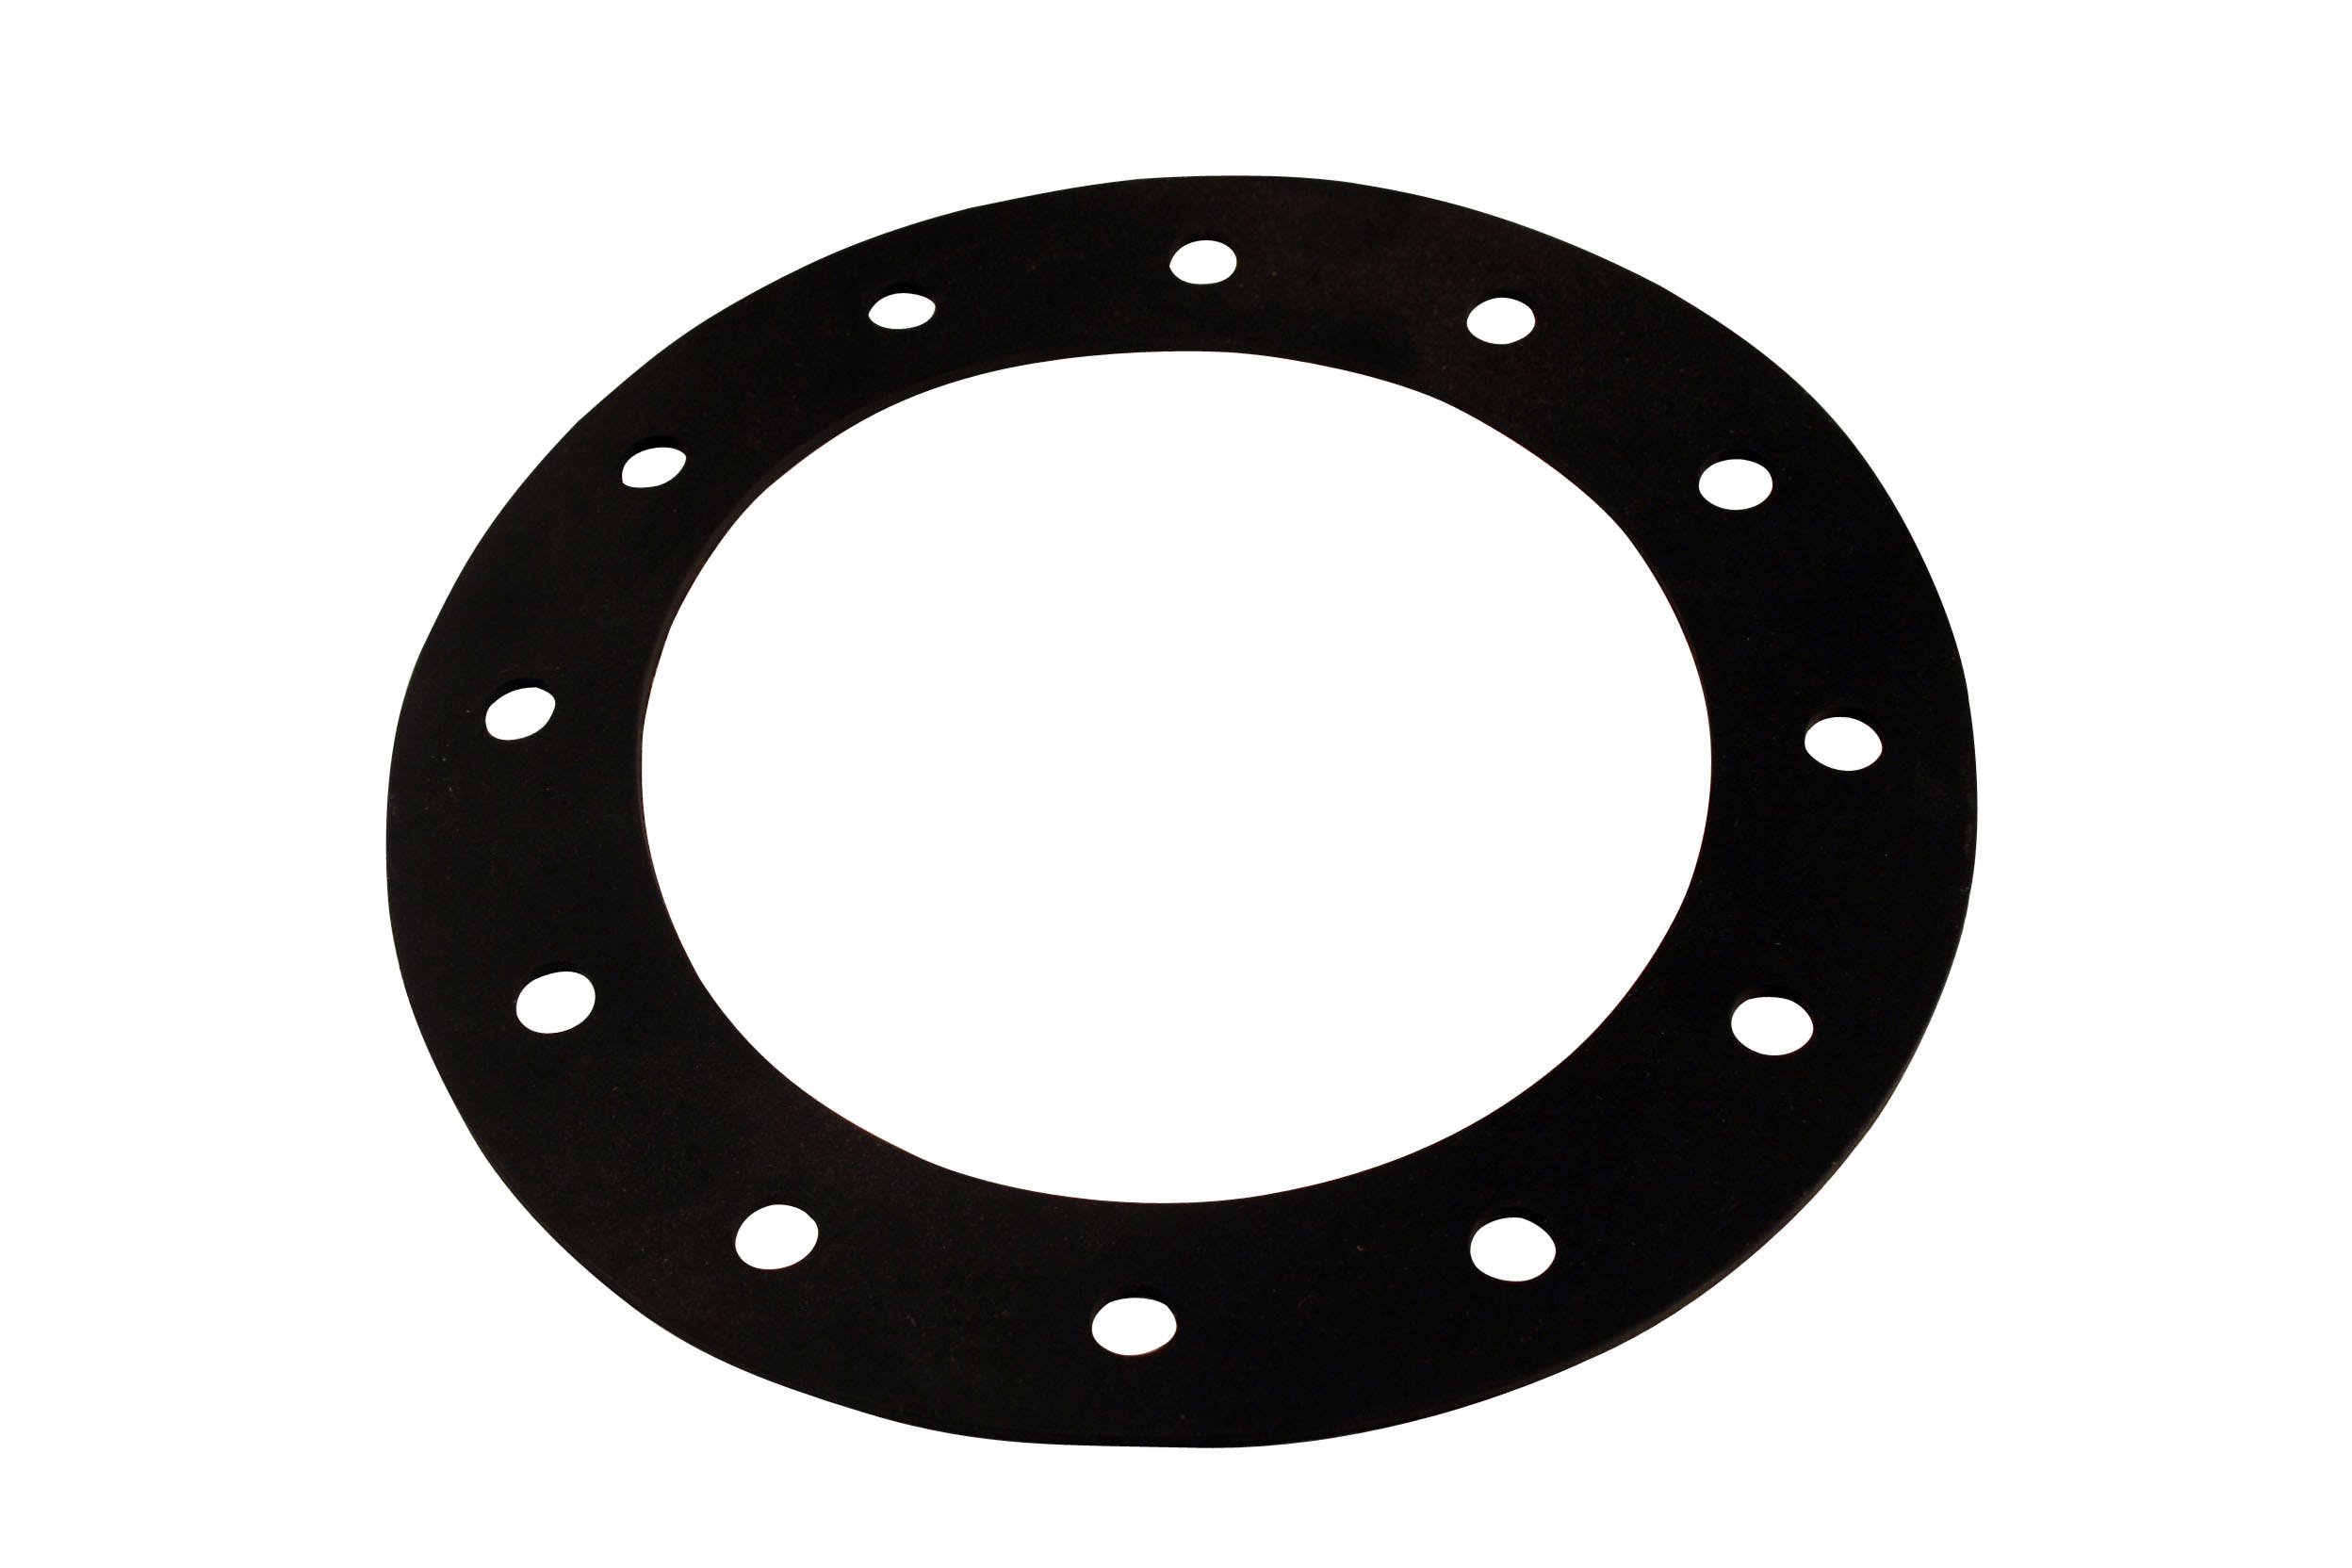 Aeromotive Fuel System 18013 Gasket, Replacement, Fuel Cell, Filler Neck